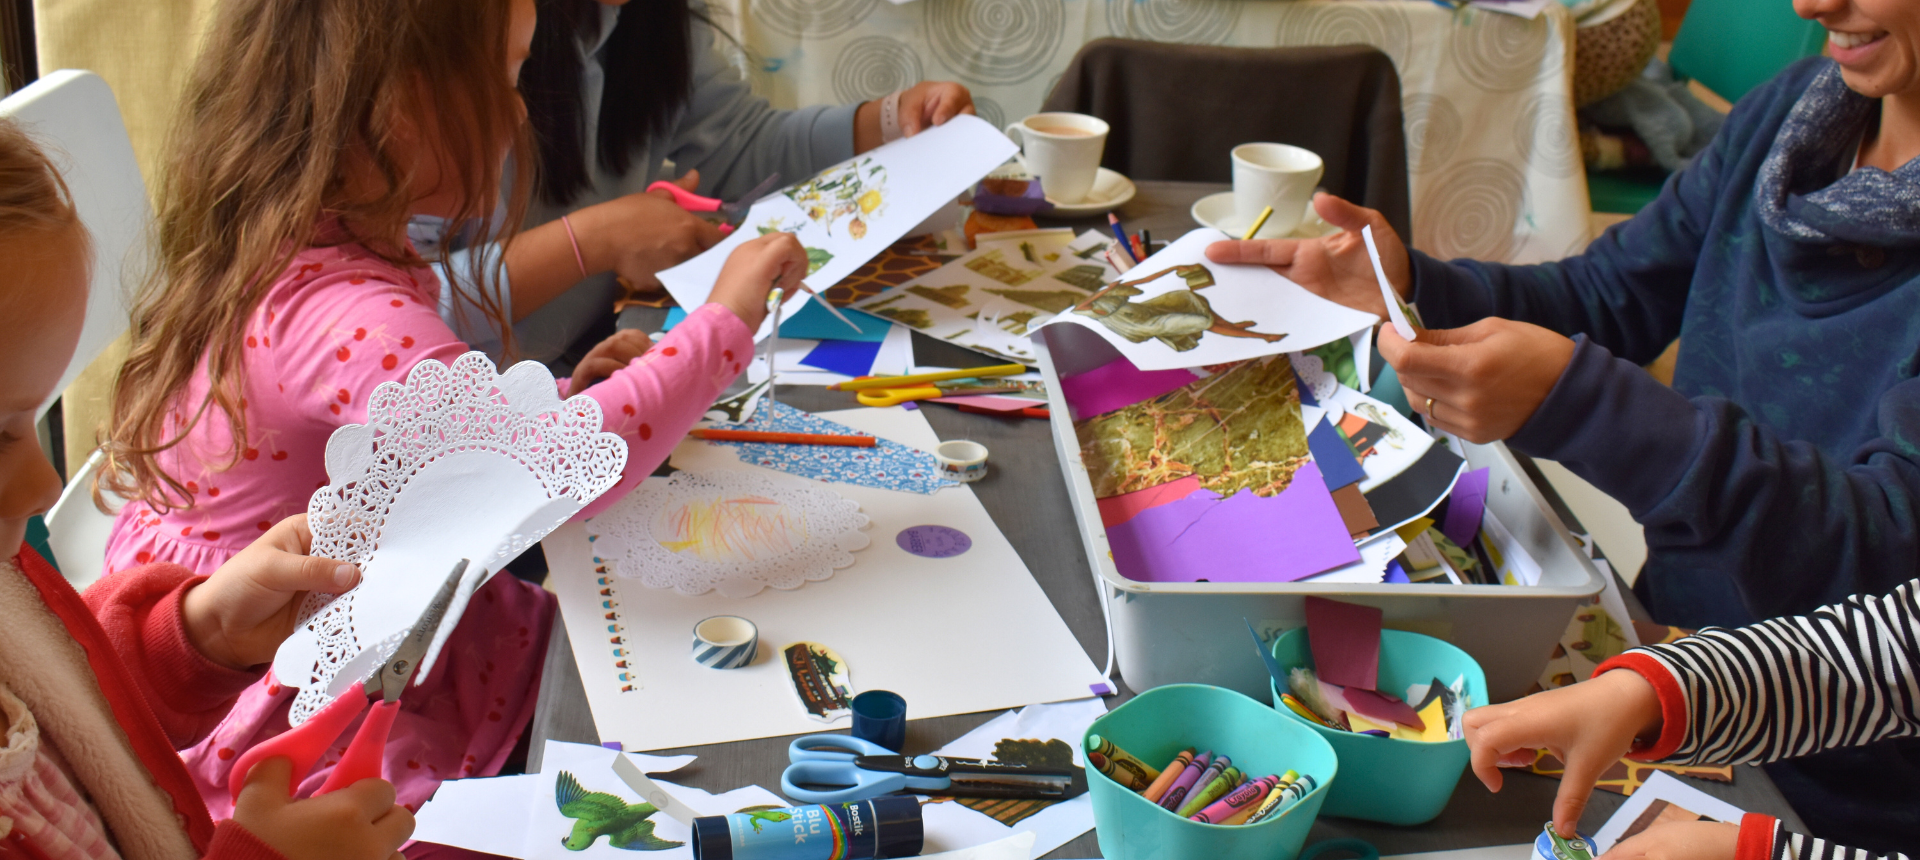 Craft supplies on a table, children's hands can be seen cutting and sticking.